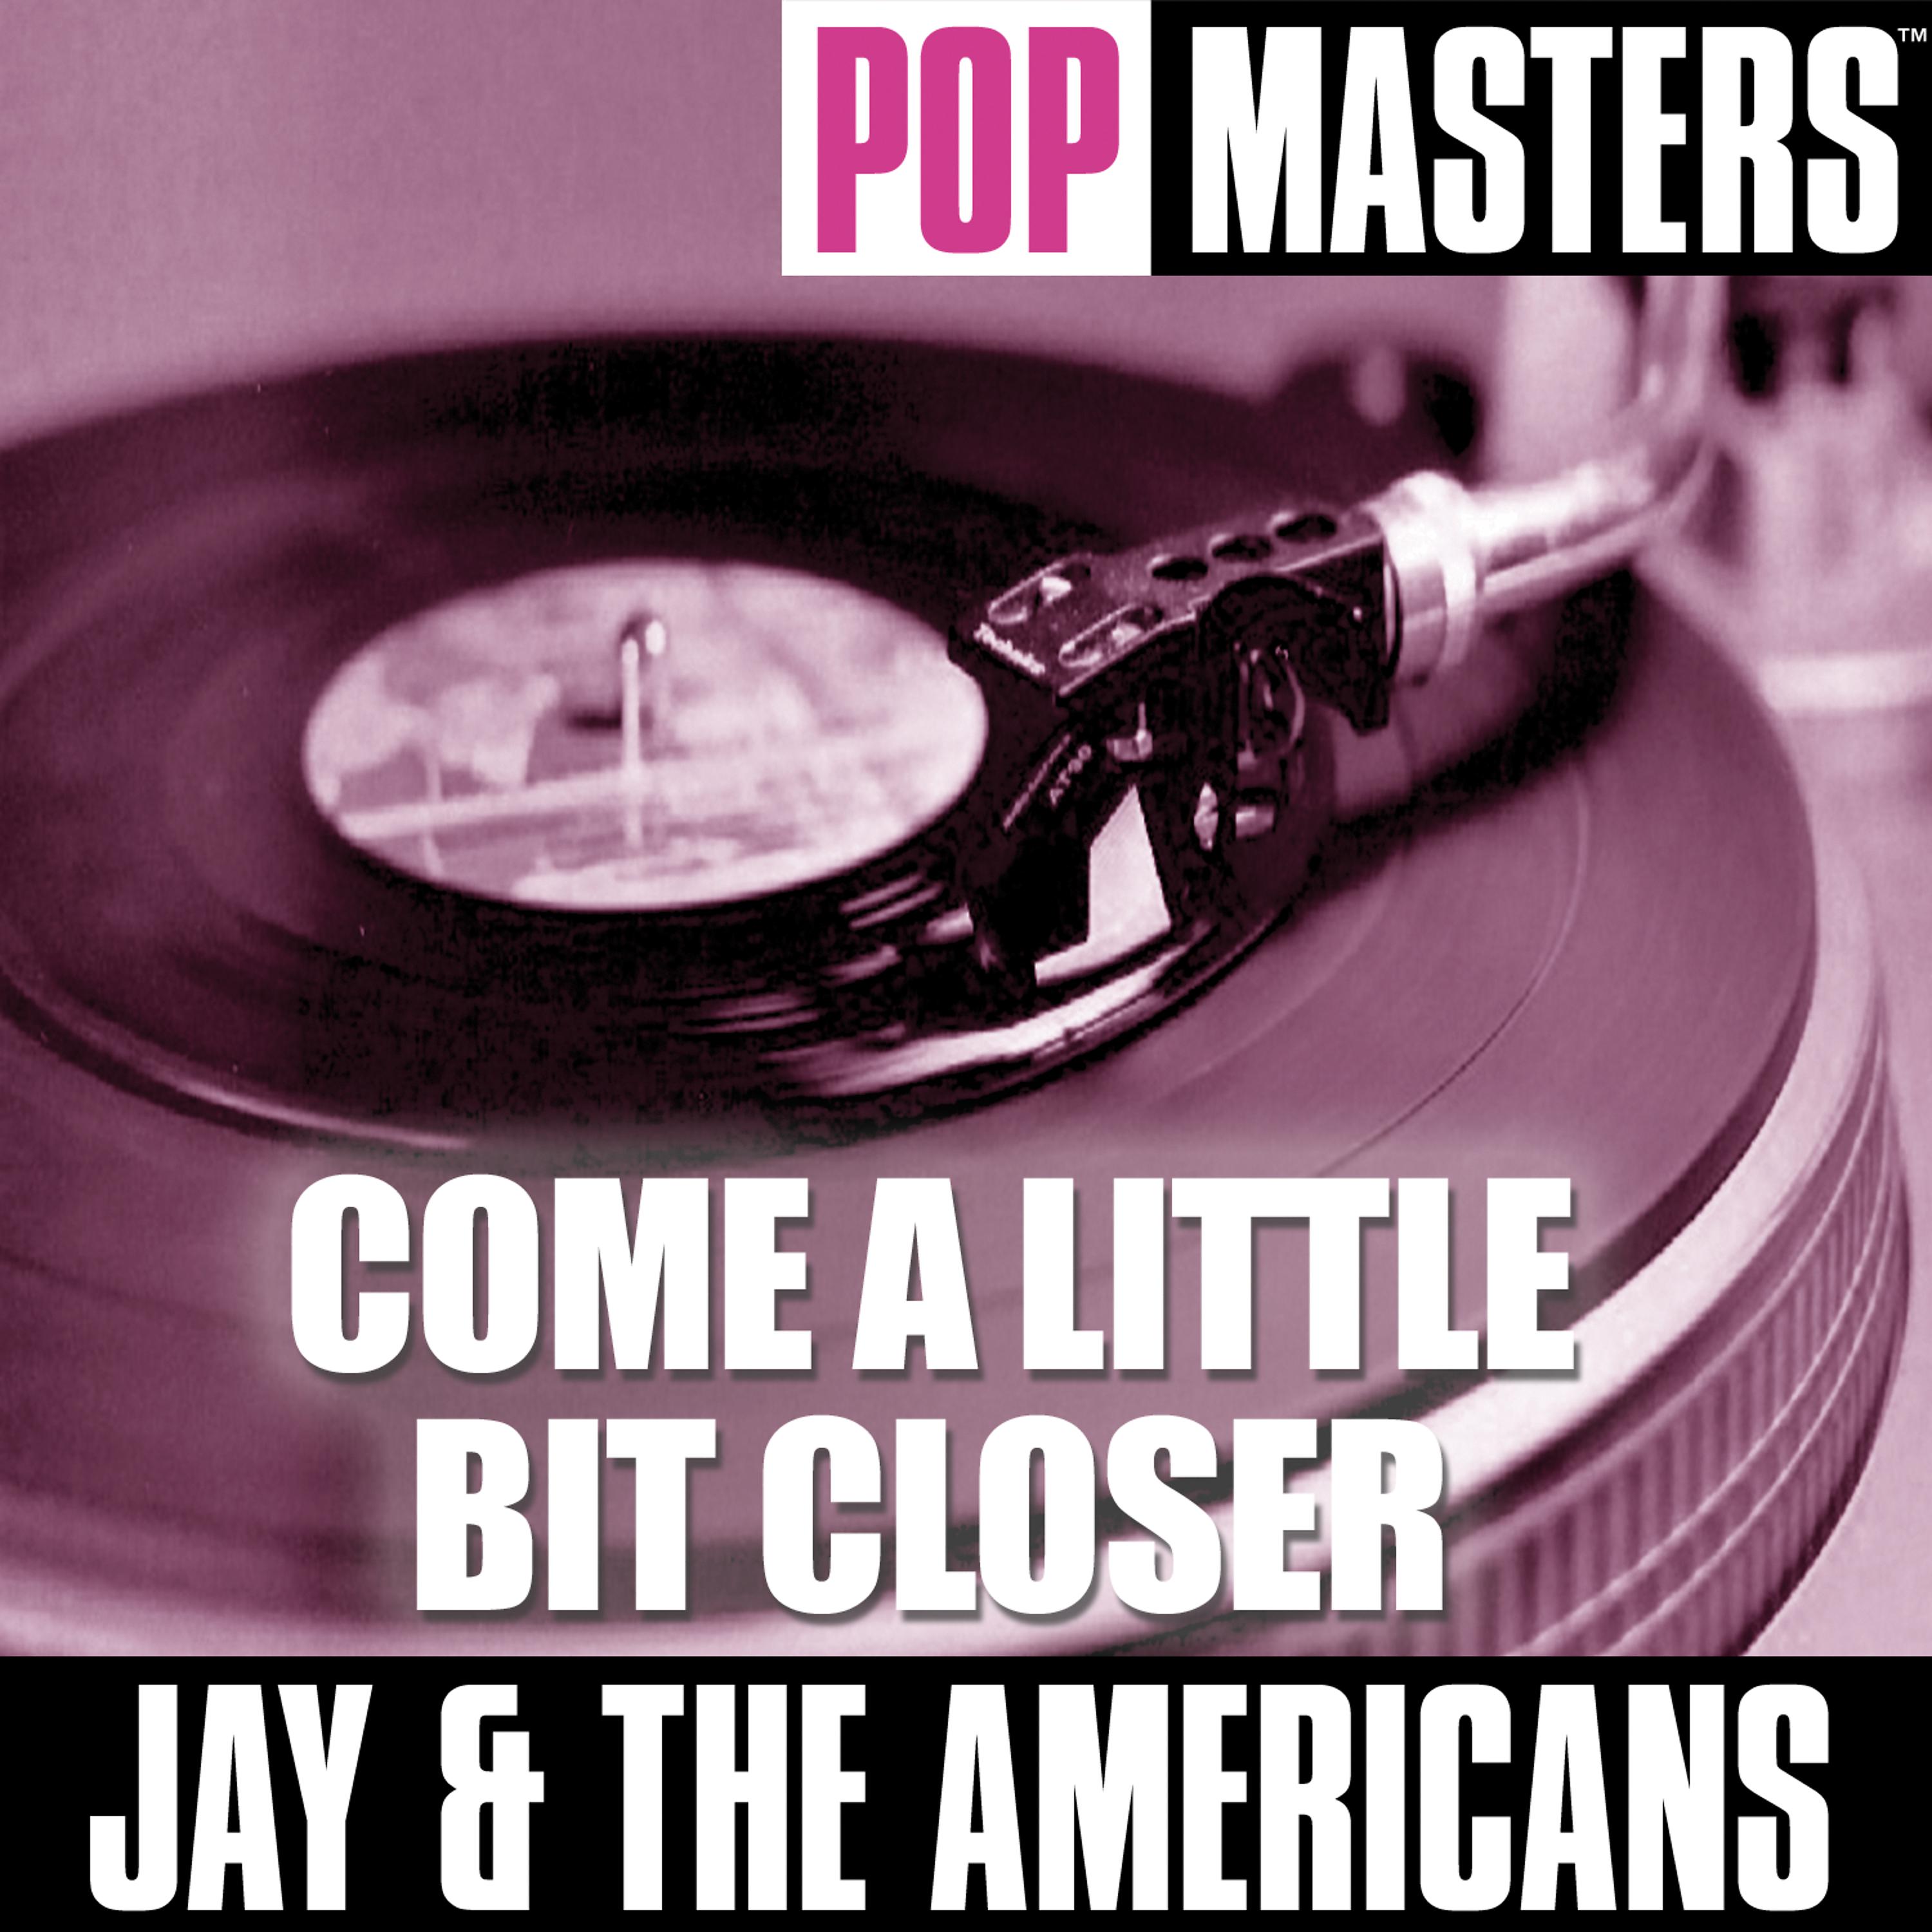 Master coming. Come a little bit closer Jay & the Americans. A little bit closer. Come a little bit closer аккорды. Come a little closer.